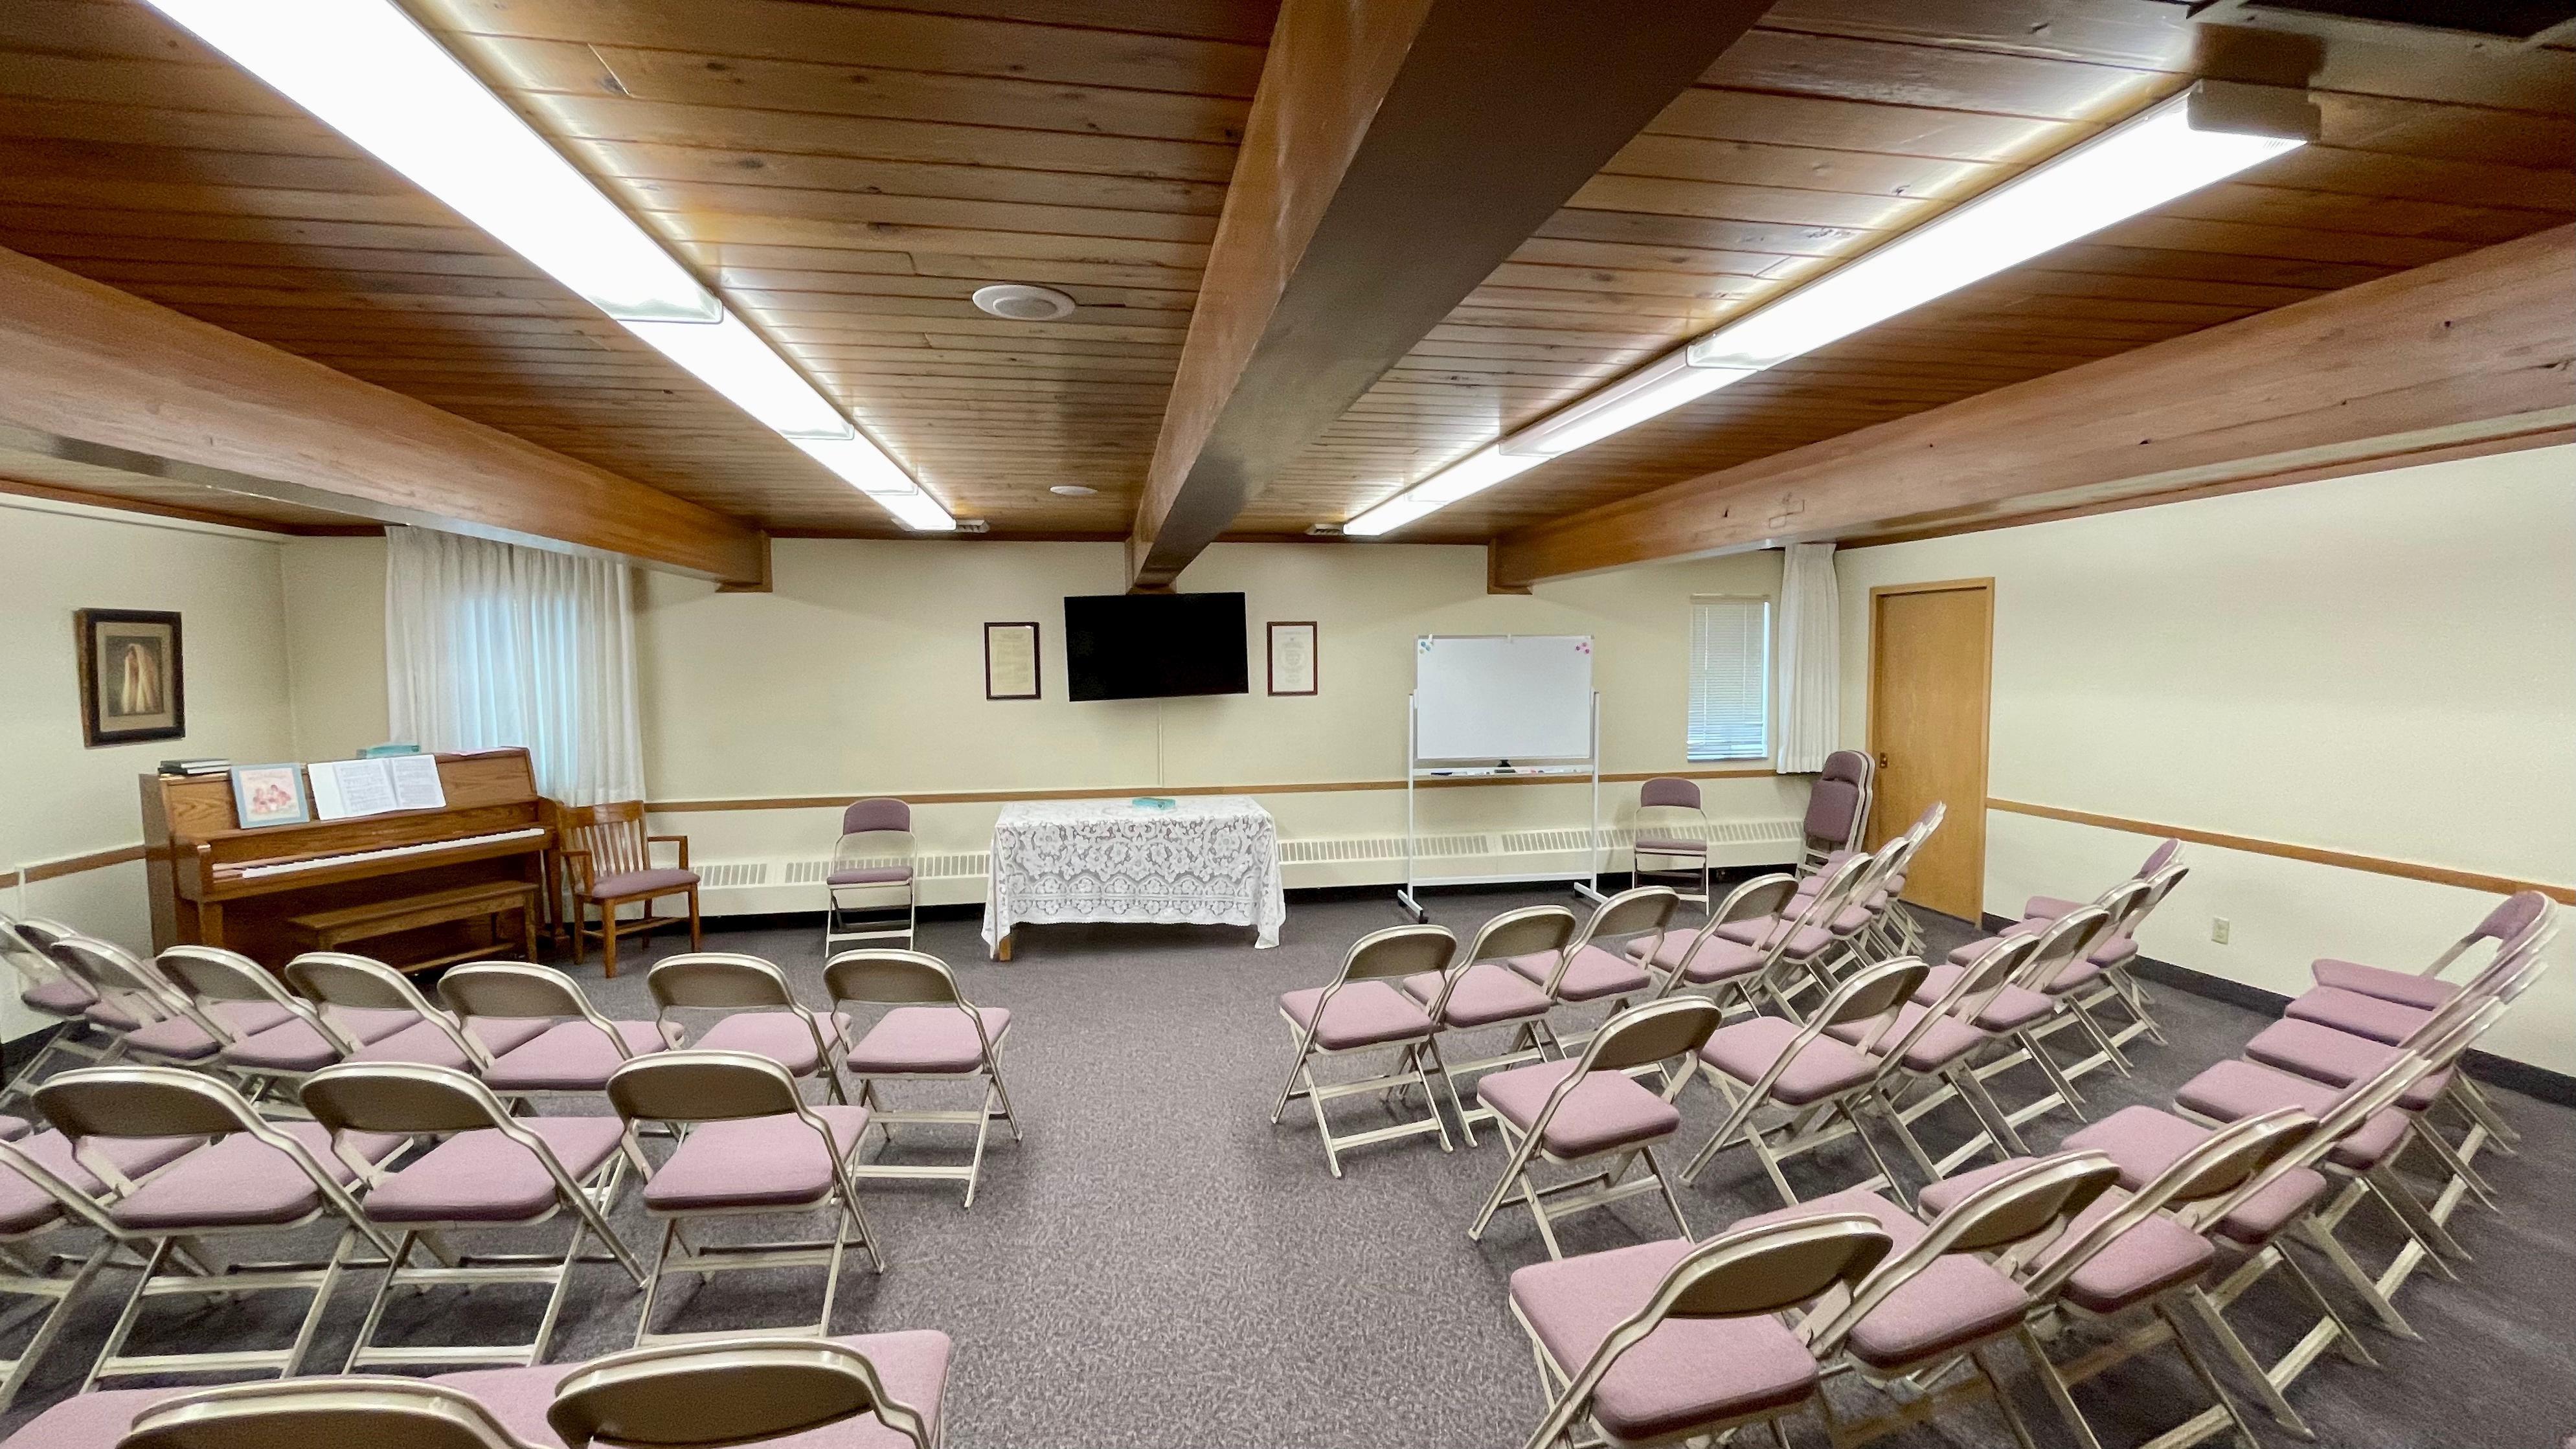 Class room for Sunday school and where women meet for gospel lessons and discussions